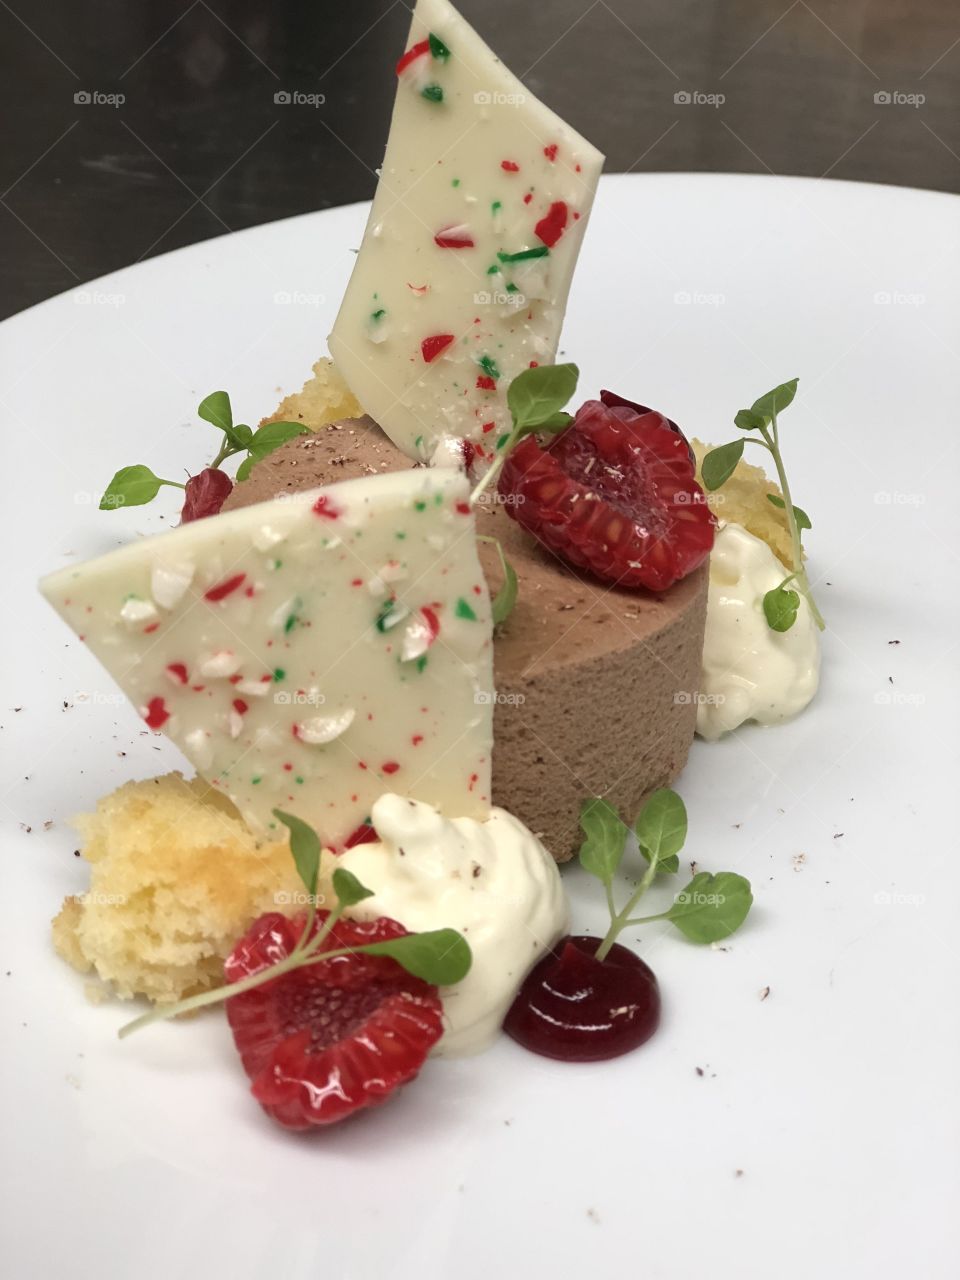 Chocolate mousse, short bread, raspberry, peppermint white chocolate bark